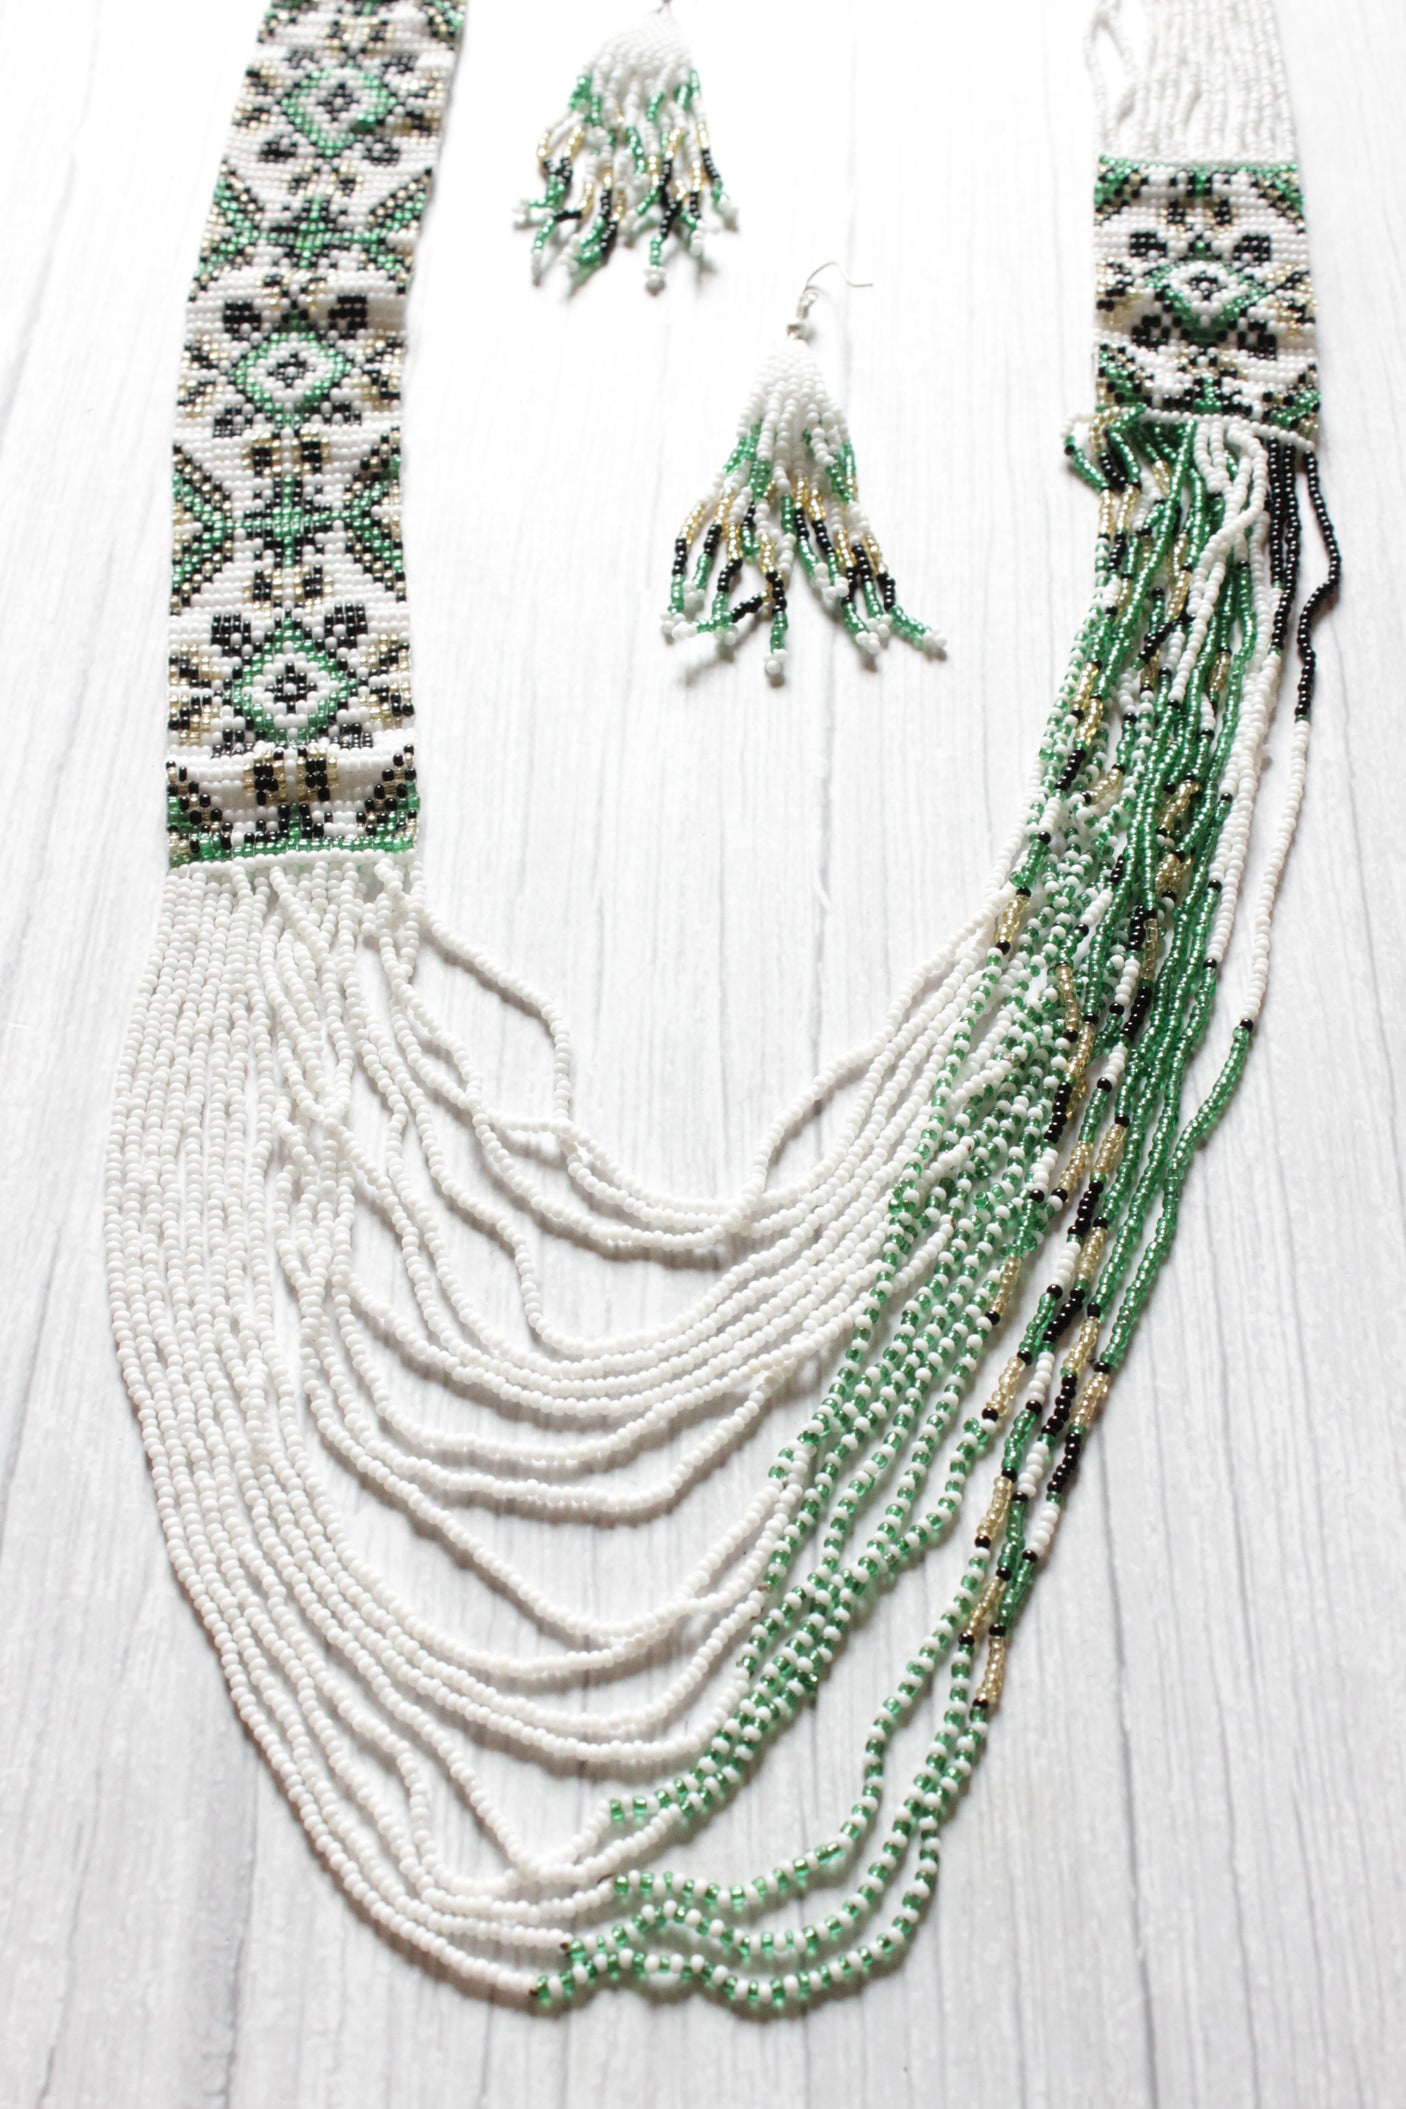 Elegant Green and White Handcrafted Beaded Necklace Set with Dangler Earrings